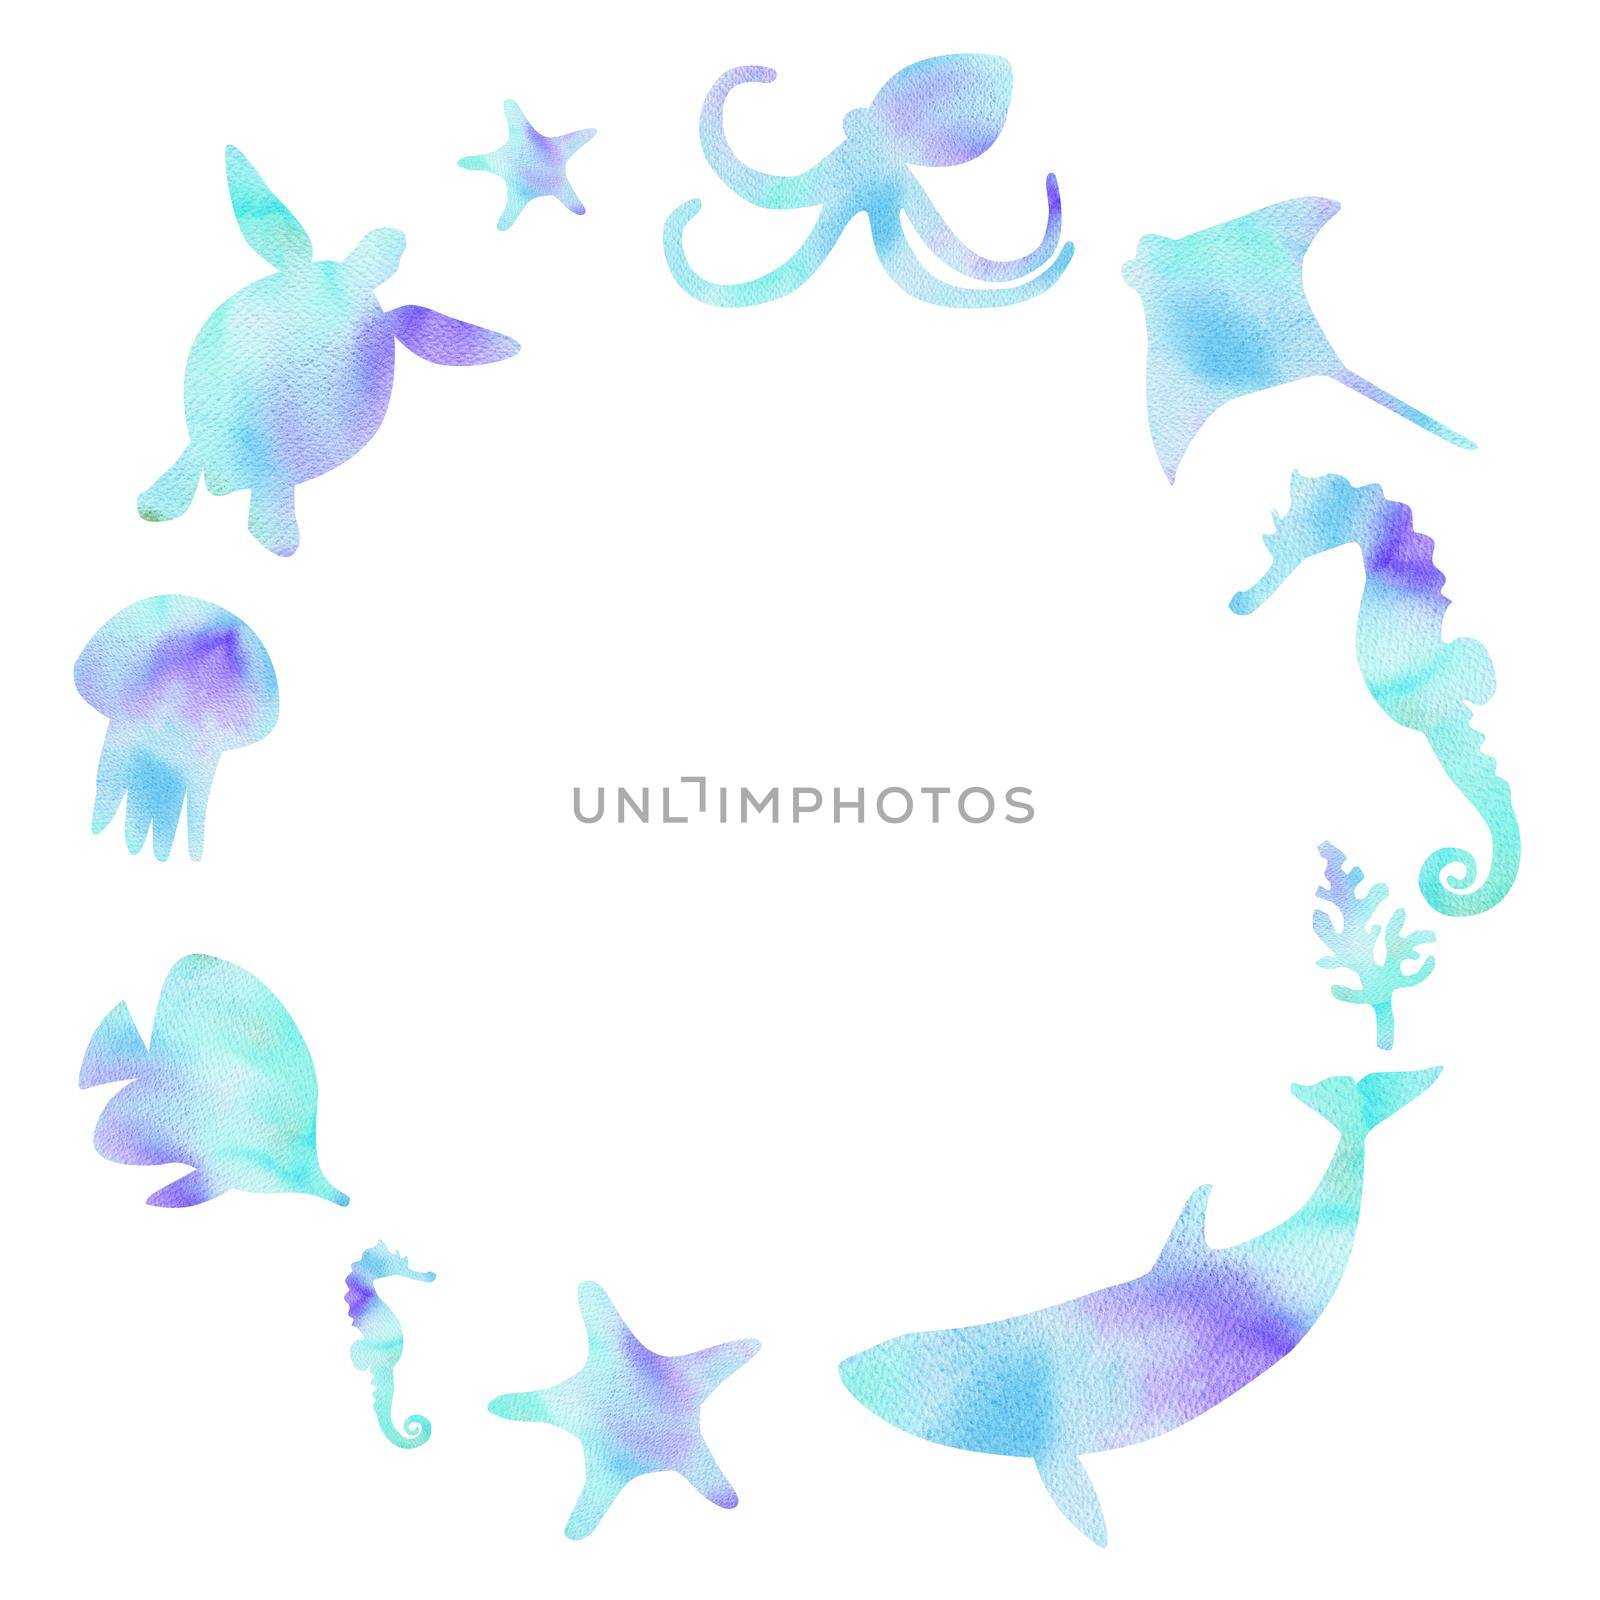 watercolor blue round frame with underwater animals and fishes isolated on white background for logo design , card border decoration,world oceans day banner by dreamloud